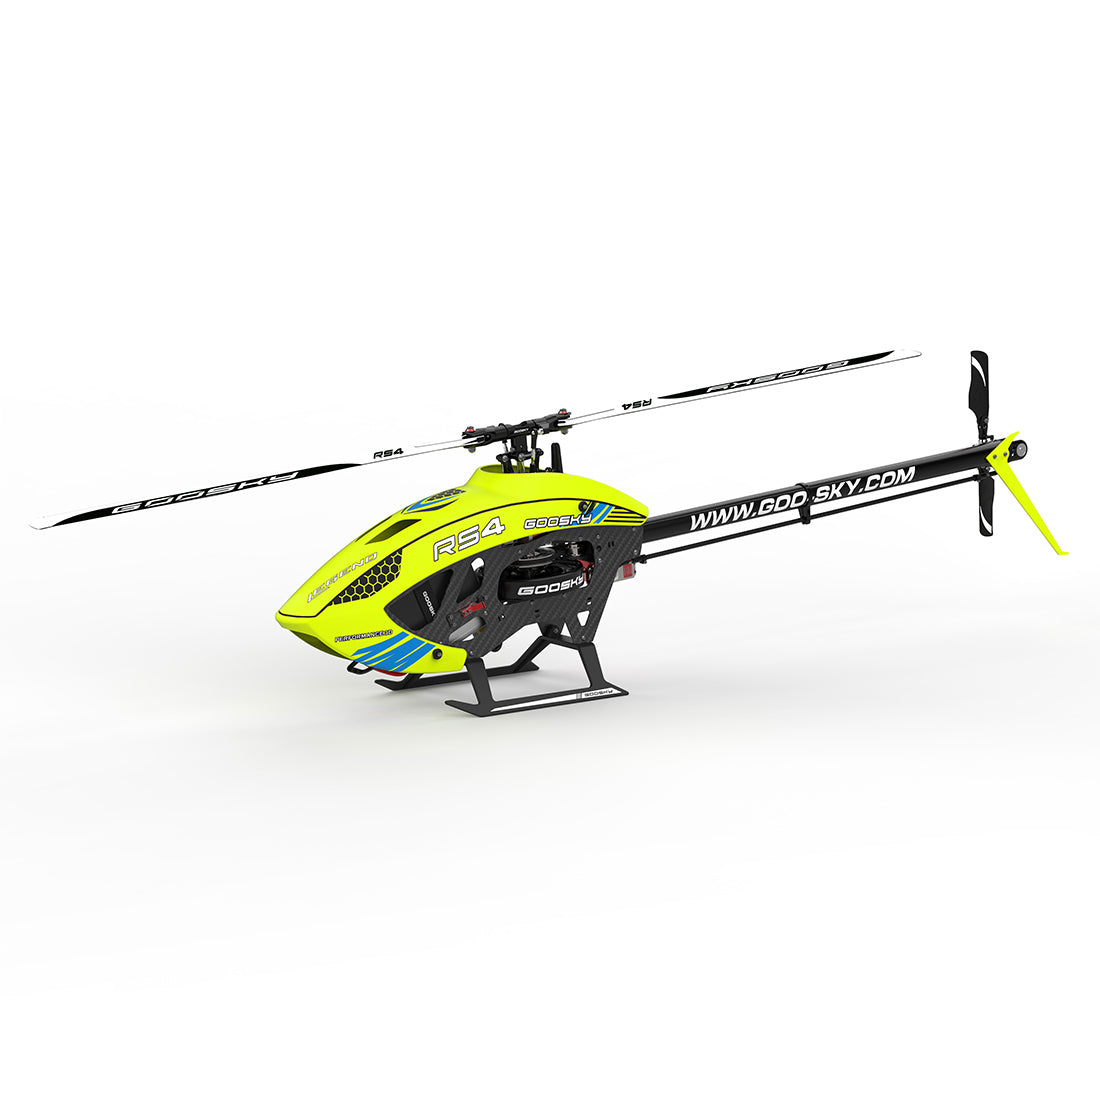 Goosky RS4 2.4G remote control brushless direct drive tail pitch aerobatic helicopter 3D aerobatic aircraft model( Kit Version)